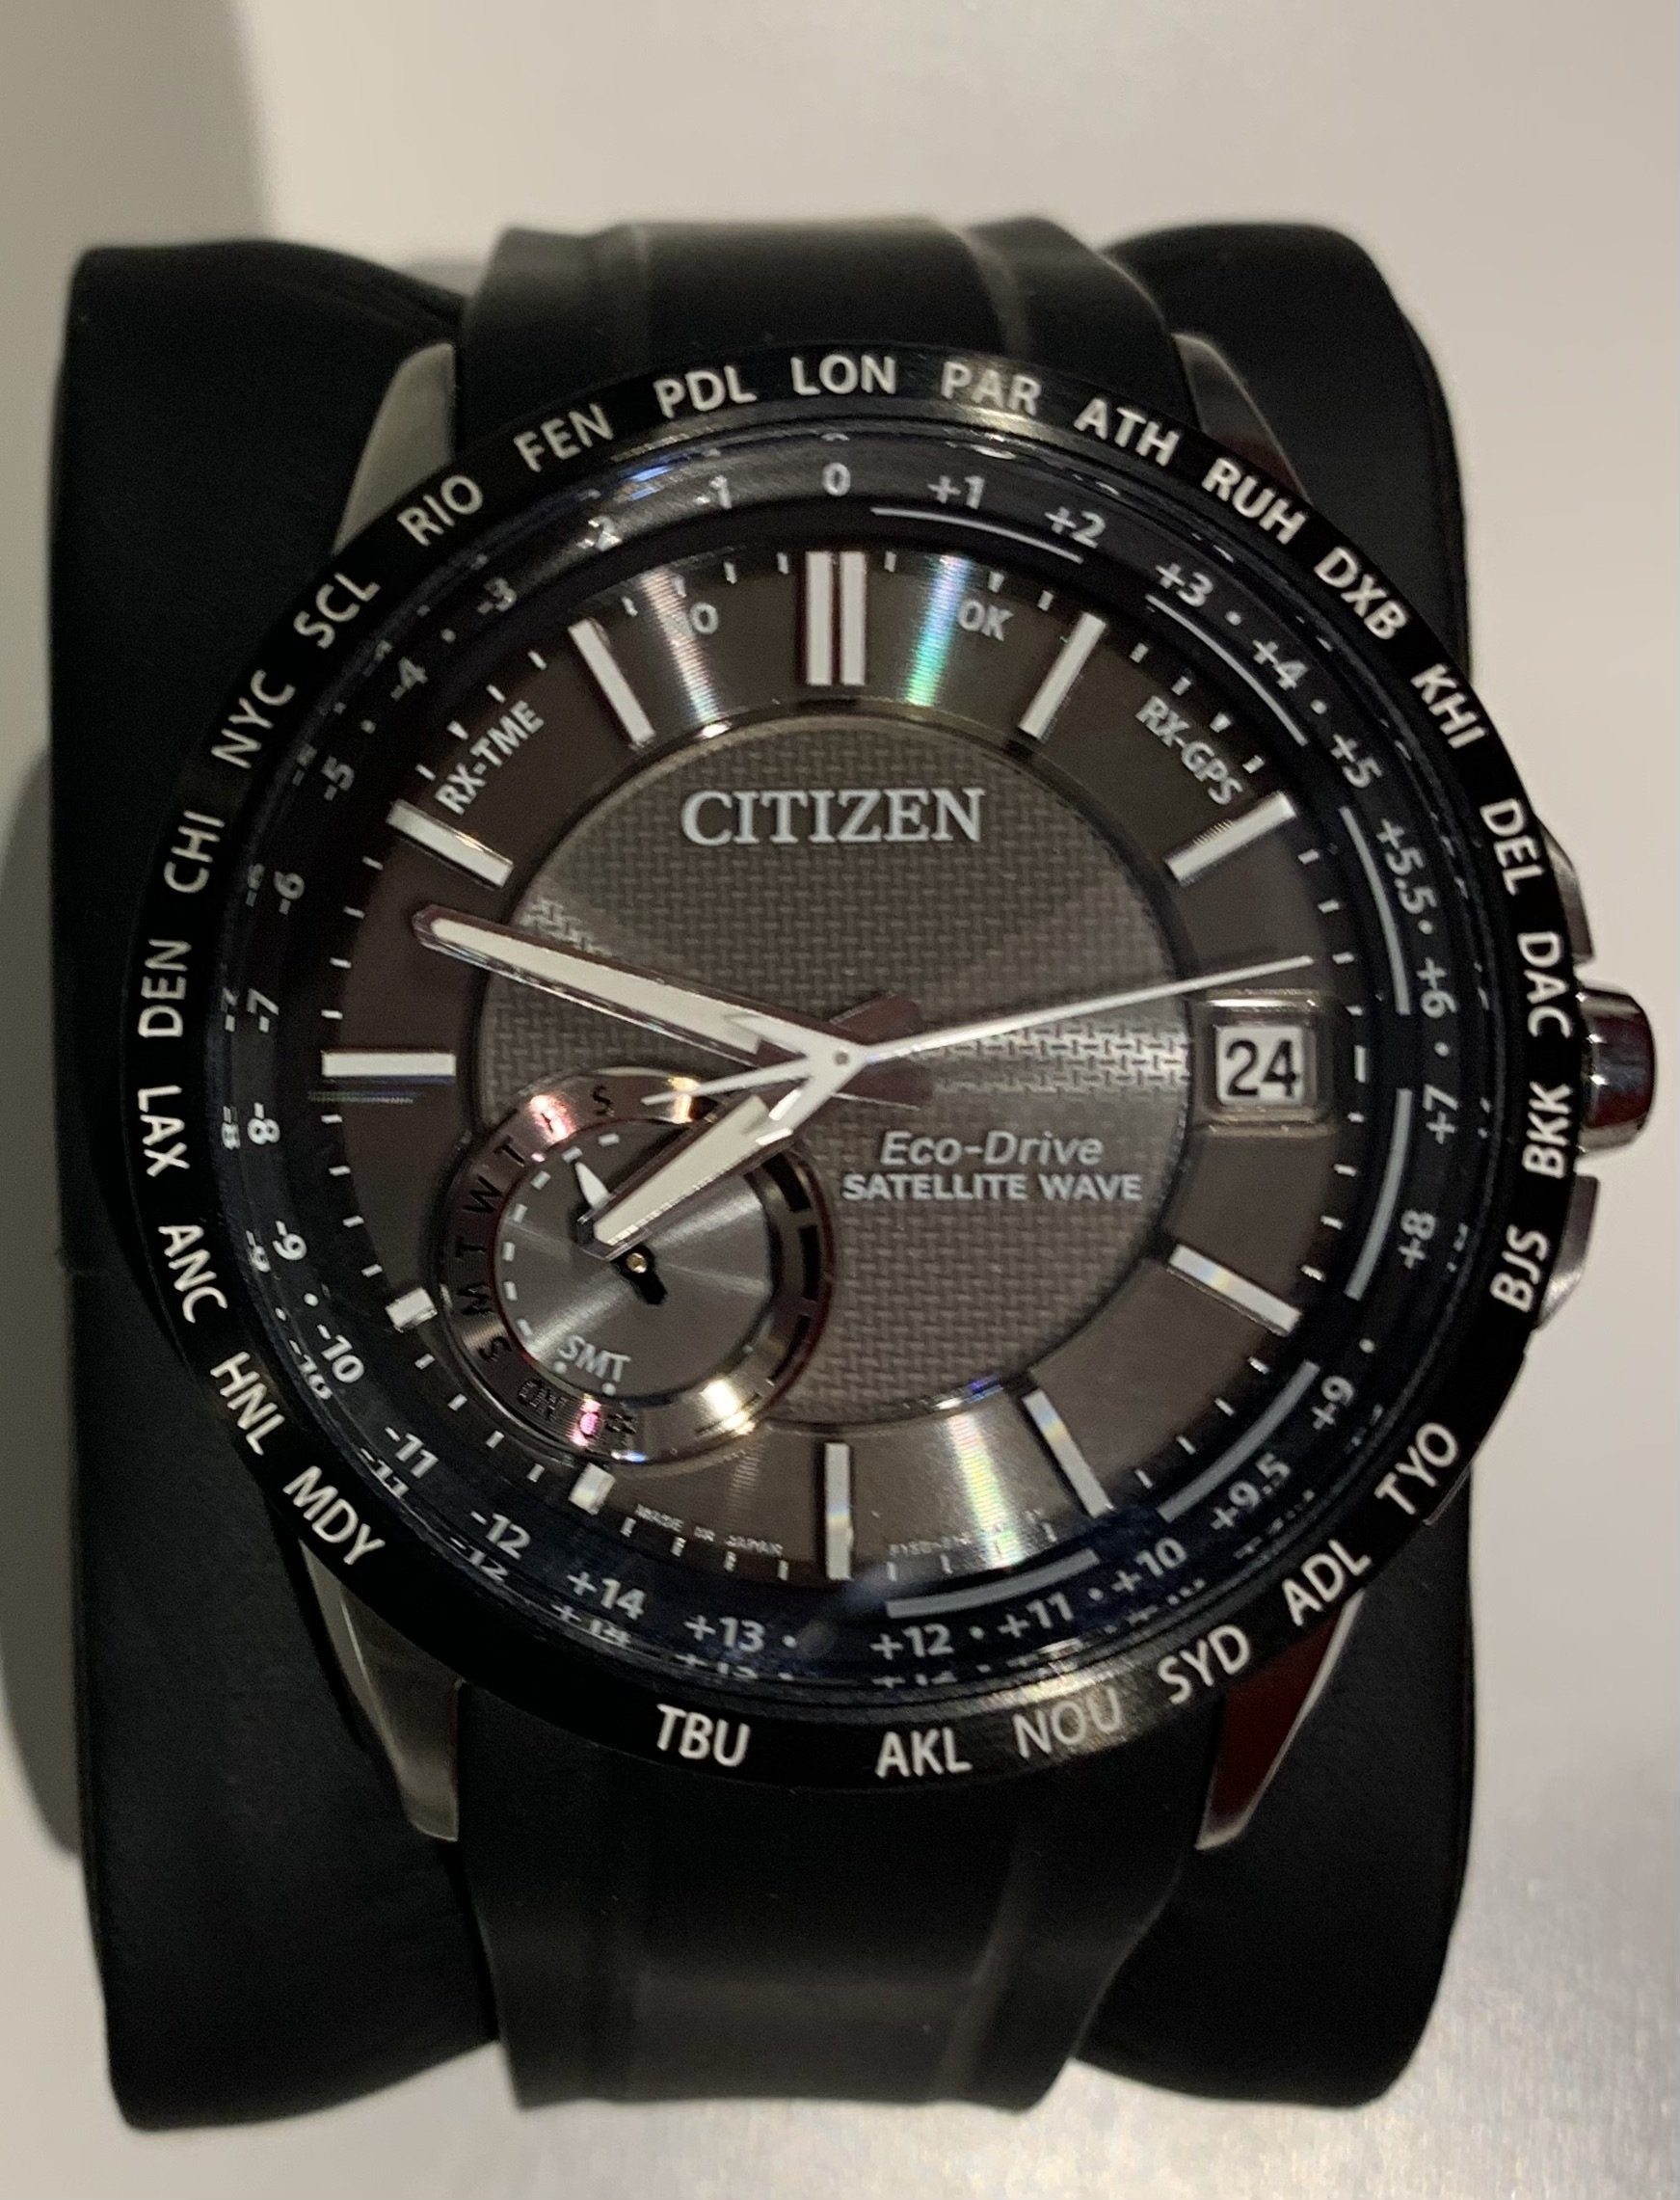 Citizen Eco-Drive Promaster Satellite Wave, GPS World Time Watch